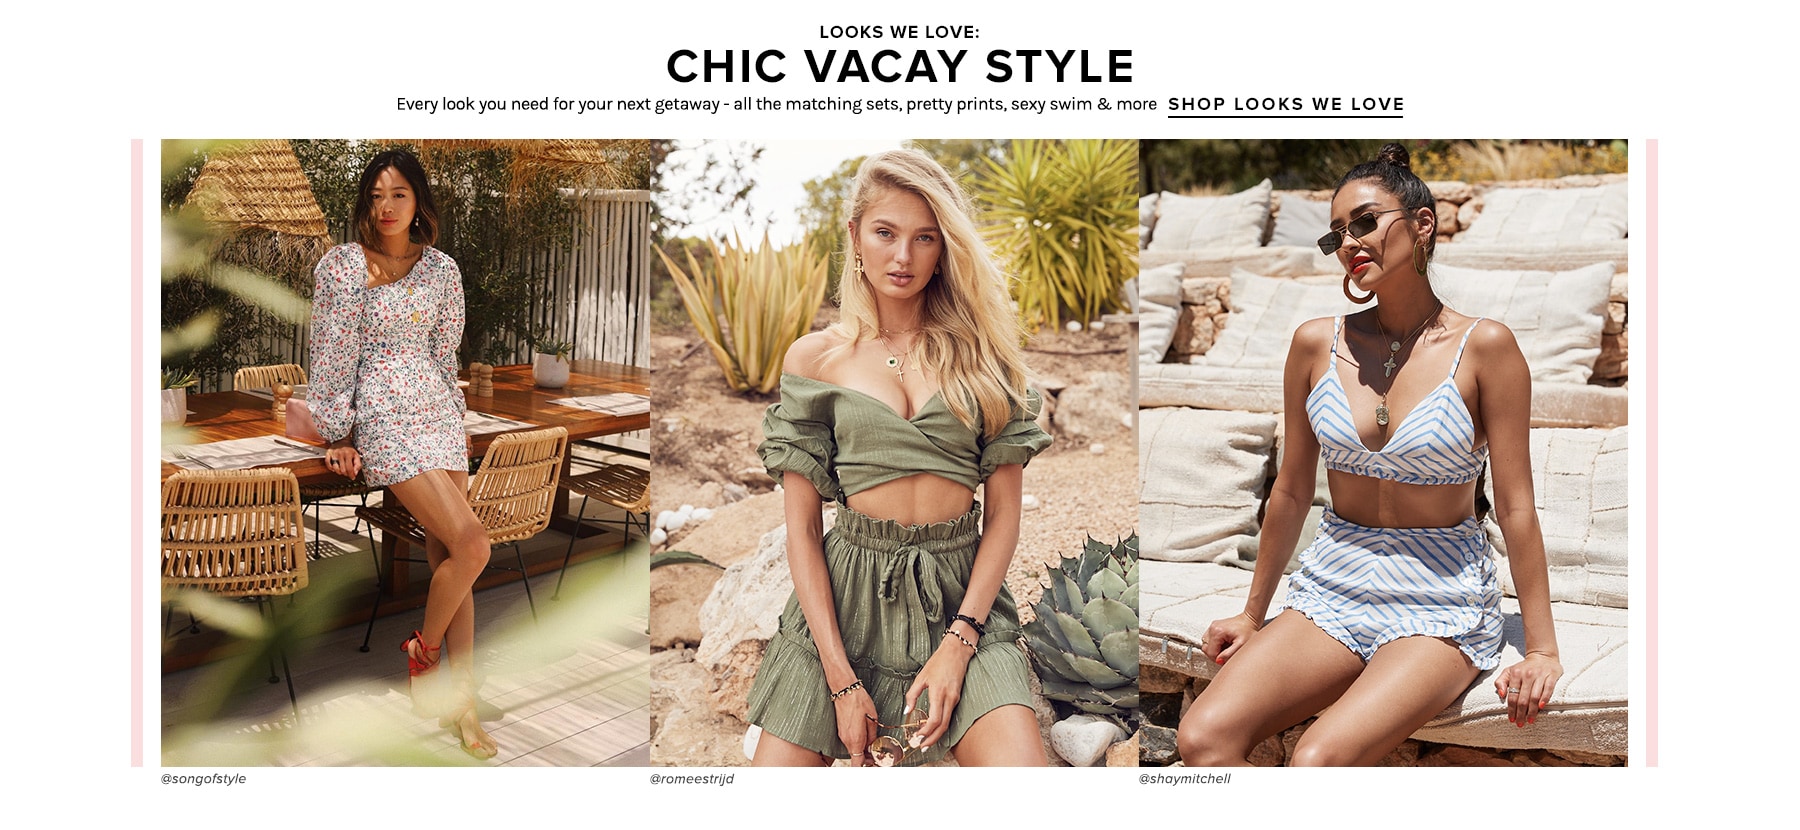 Looks We Love: Chic Vacay Style. Every look you need for your next getaway - all the matching sets, pretty prints, sexy swim & more. Shop looks we love.